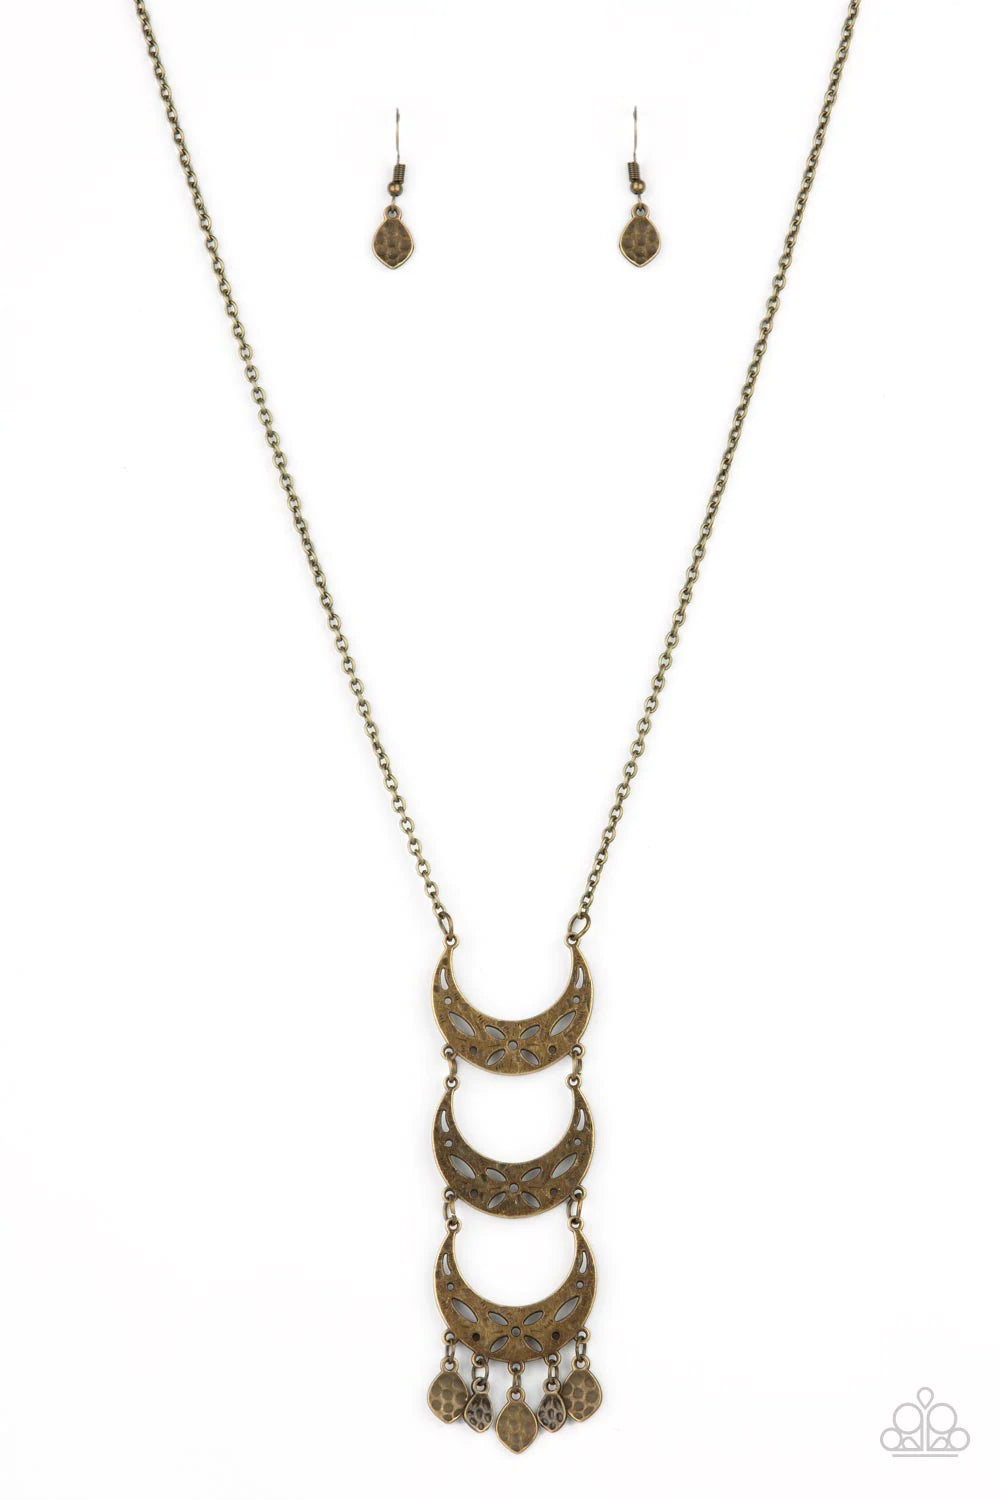 Paparazzi Accessories Half-Moon Child - Brass Stenciled in airy floral details, antiqued brass half-moon frames link into a triple stacked pendant at the bottom of a lengthened brass chain. Hammered brass frames trickle from the bottom, adding playful mov